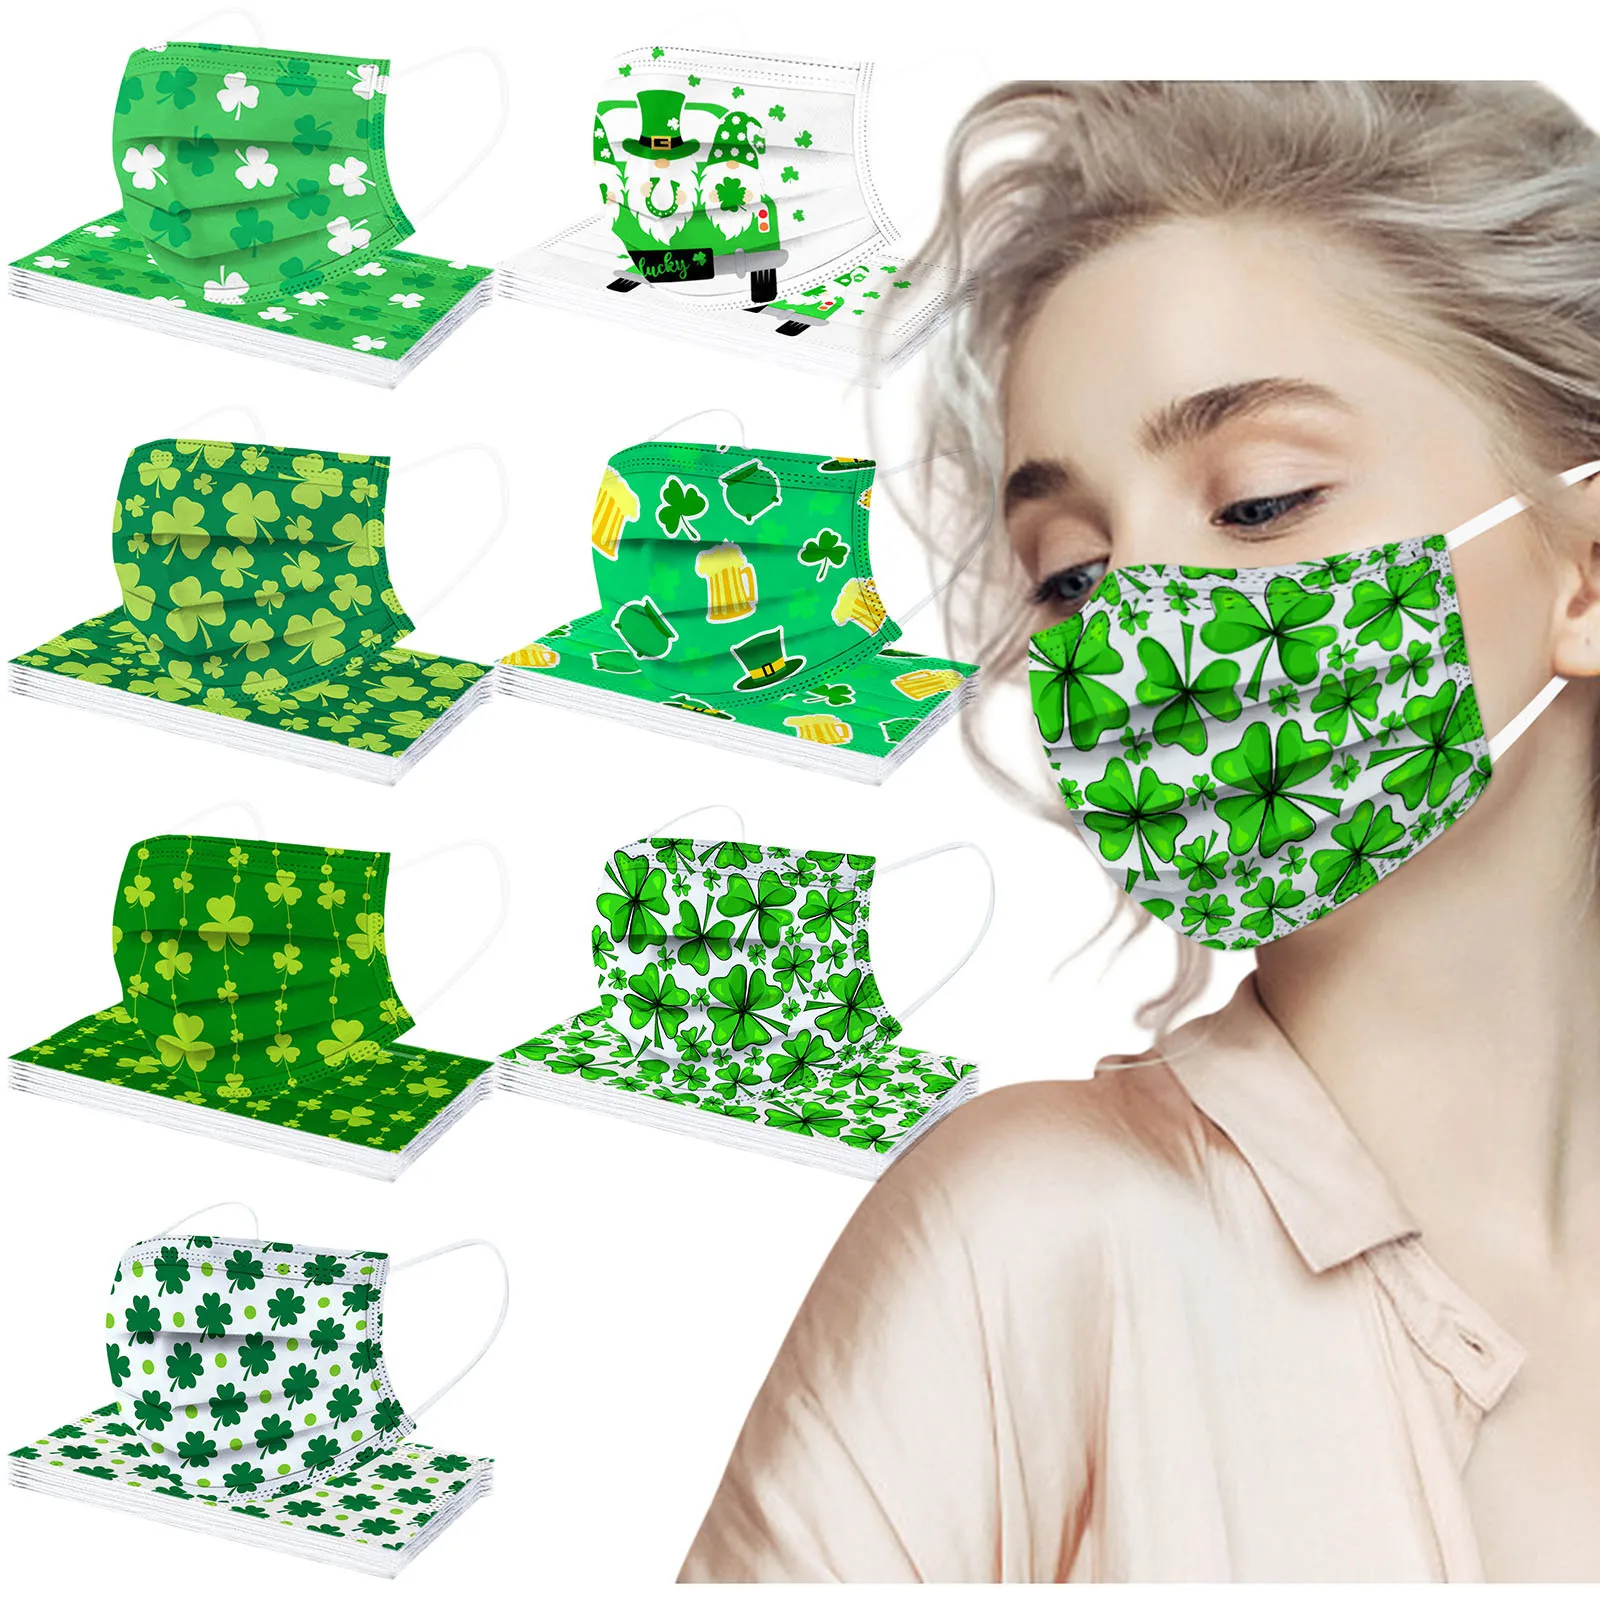 

10pc Disposable Adult Mask St. Patrick's Day Green Print Party Mondmasker 3ply Ear Loop Facemask Mascarillas Halloween Cosplay